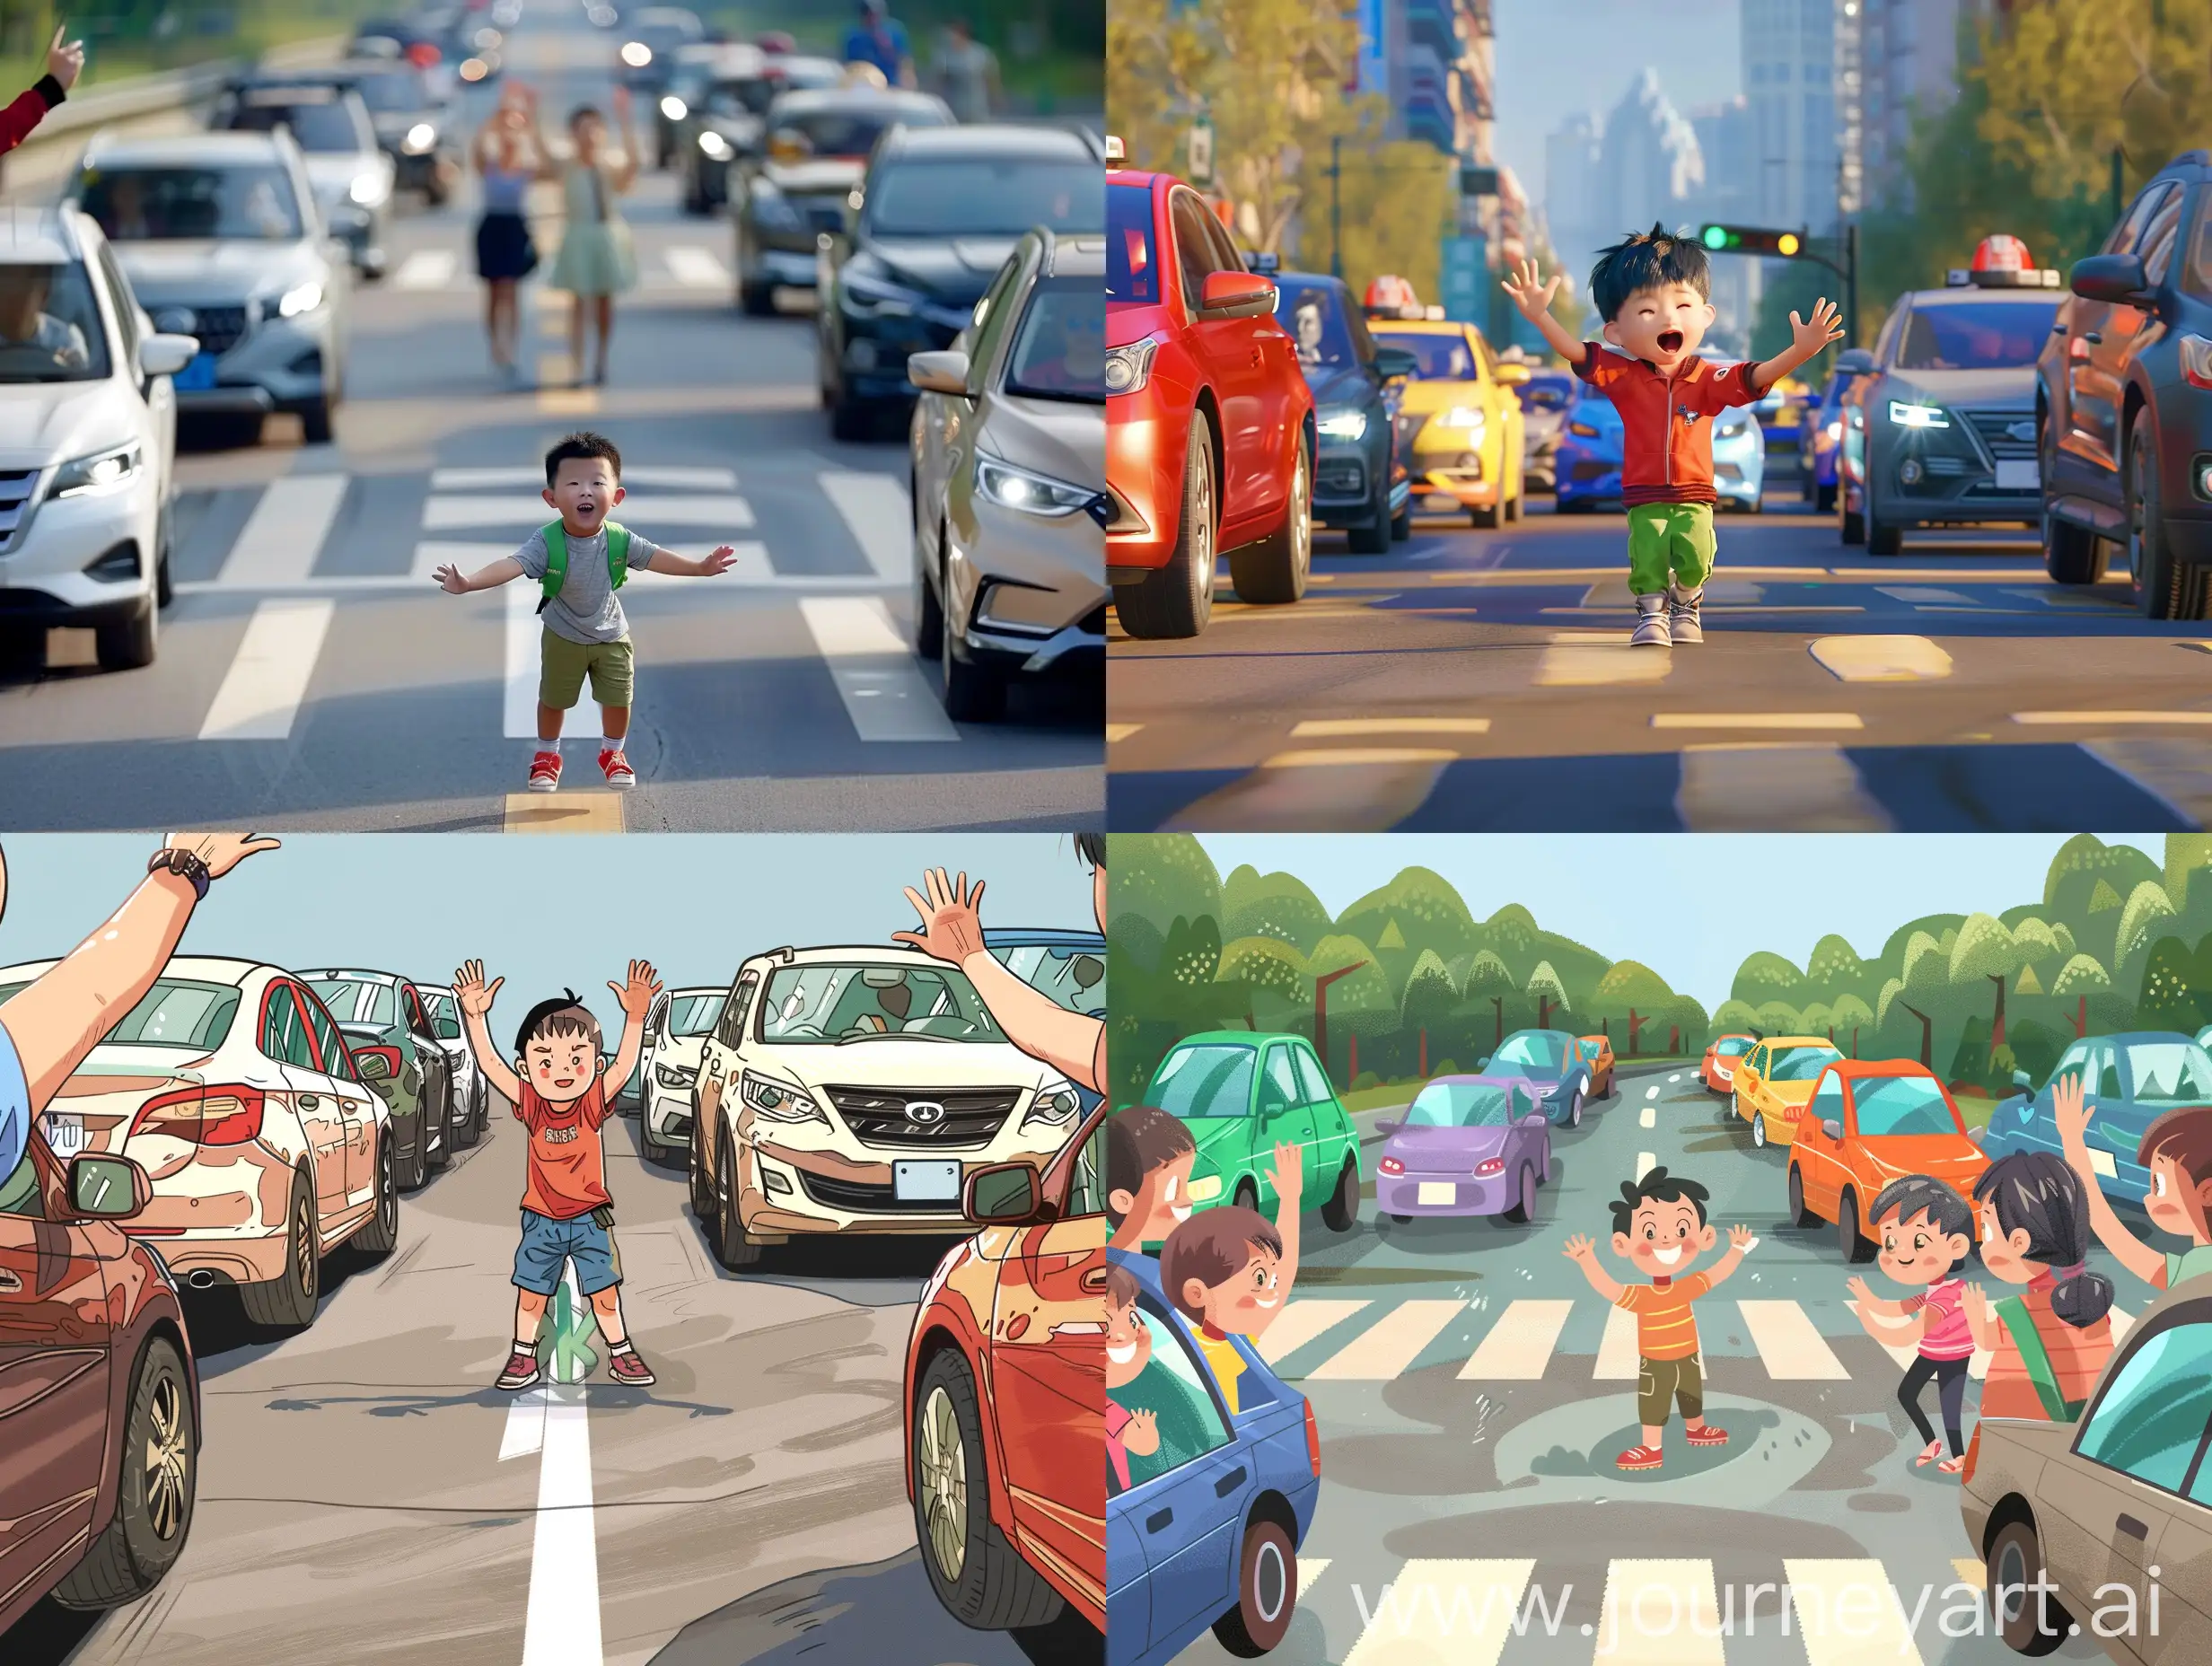 Enthusiastic-Chinese-Boy-Directing-Traffic-with-Cars-Waving-in-Thanks